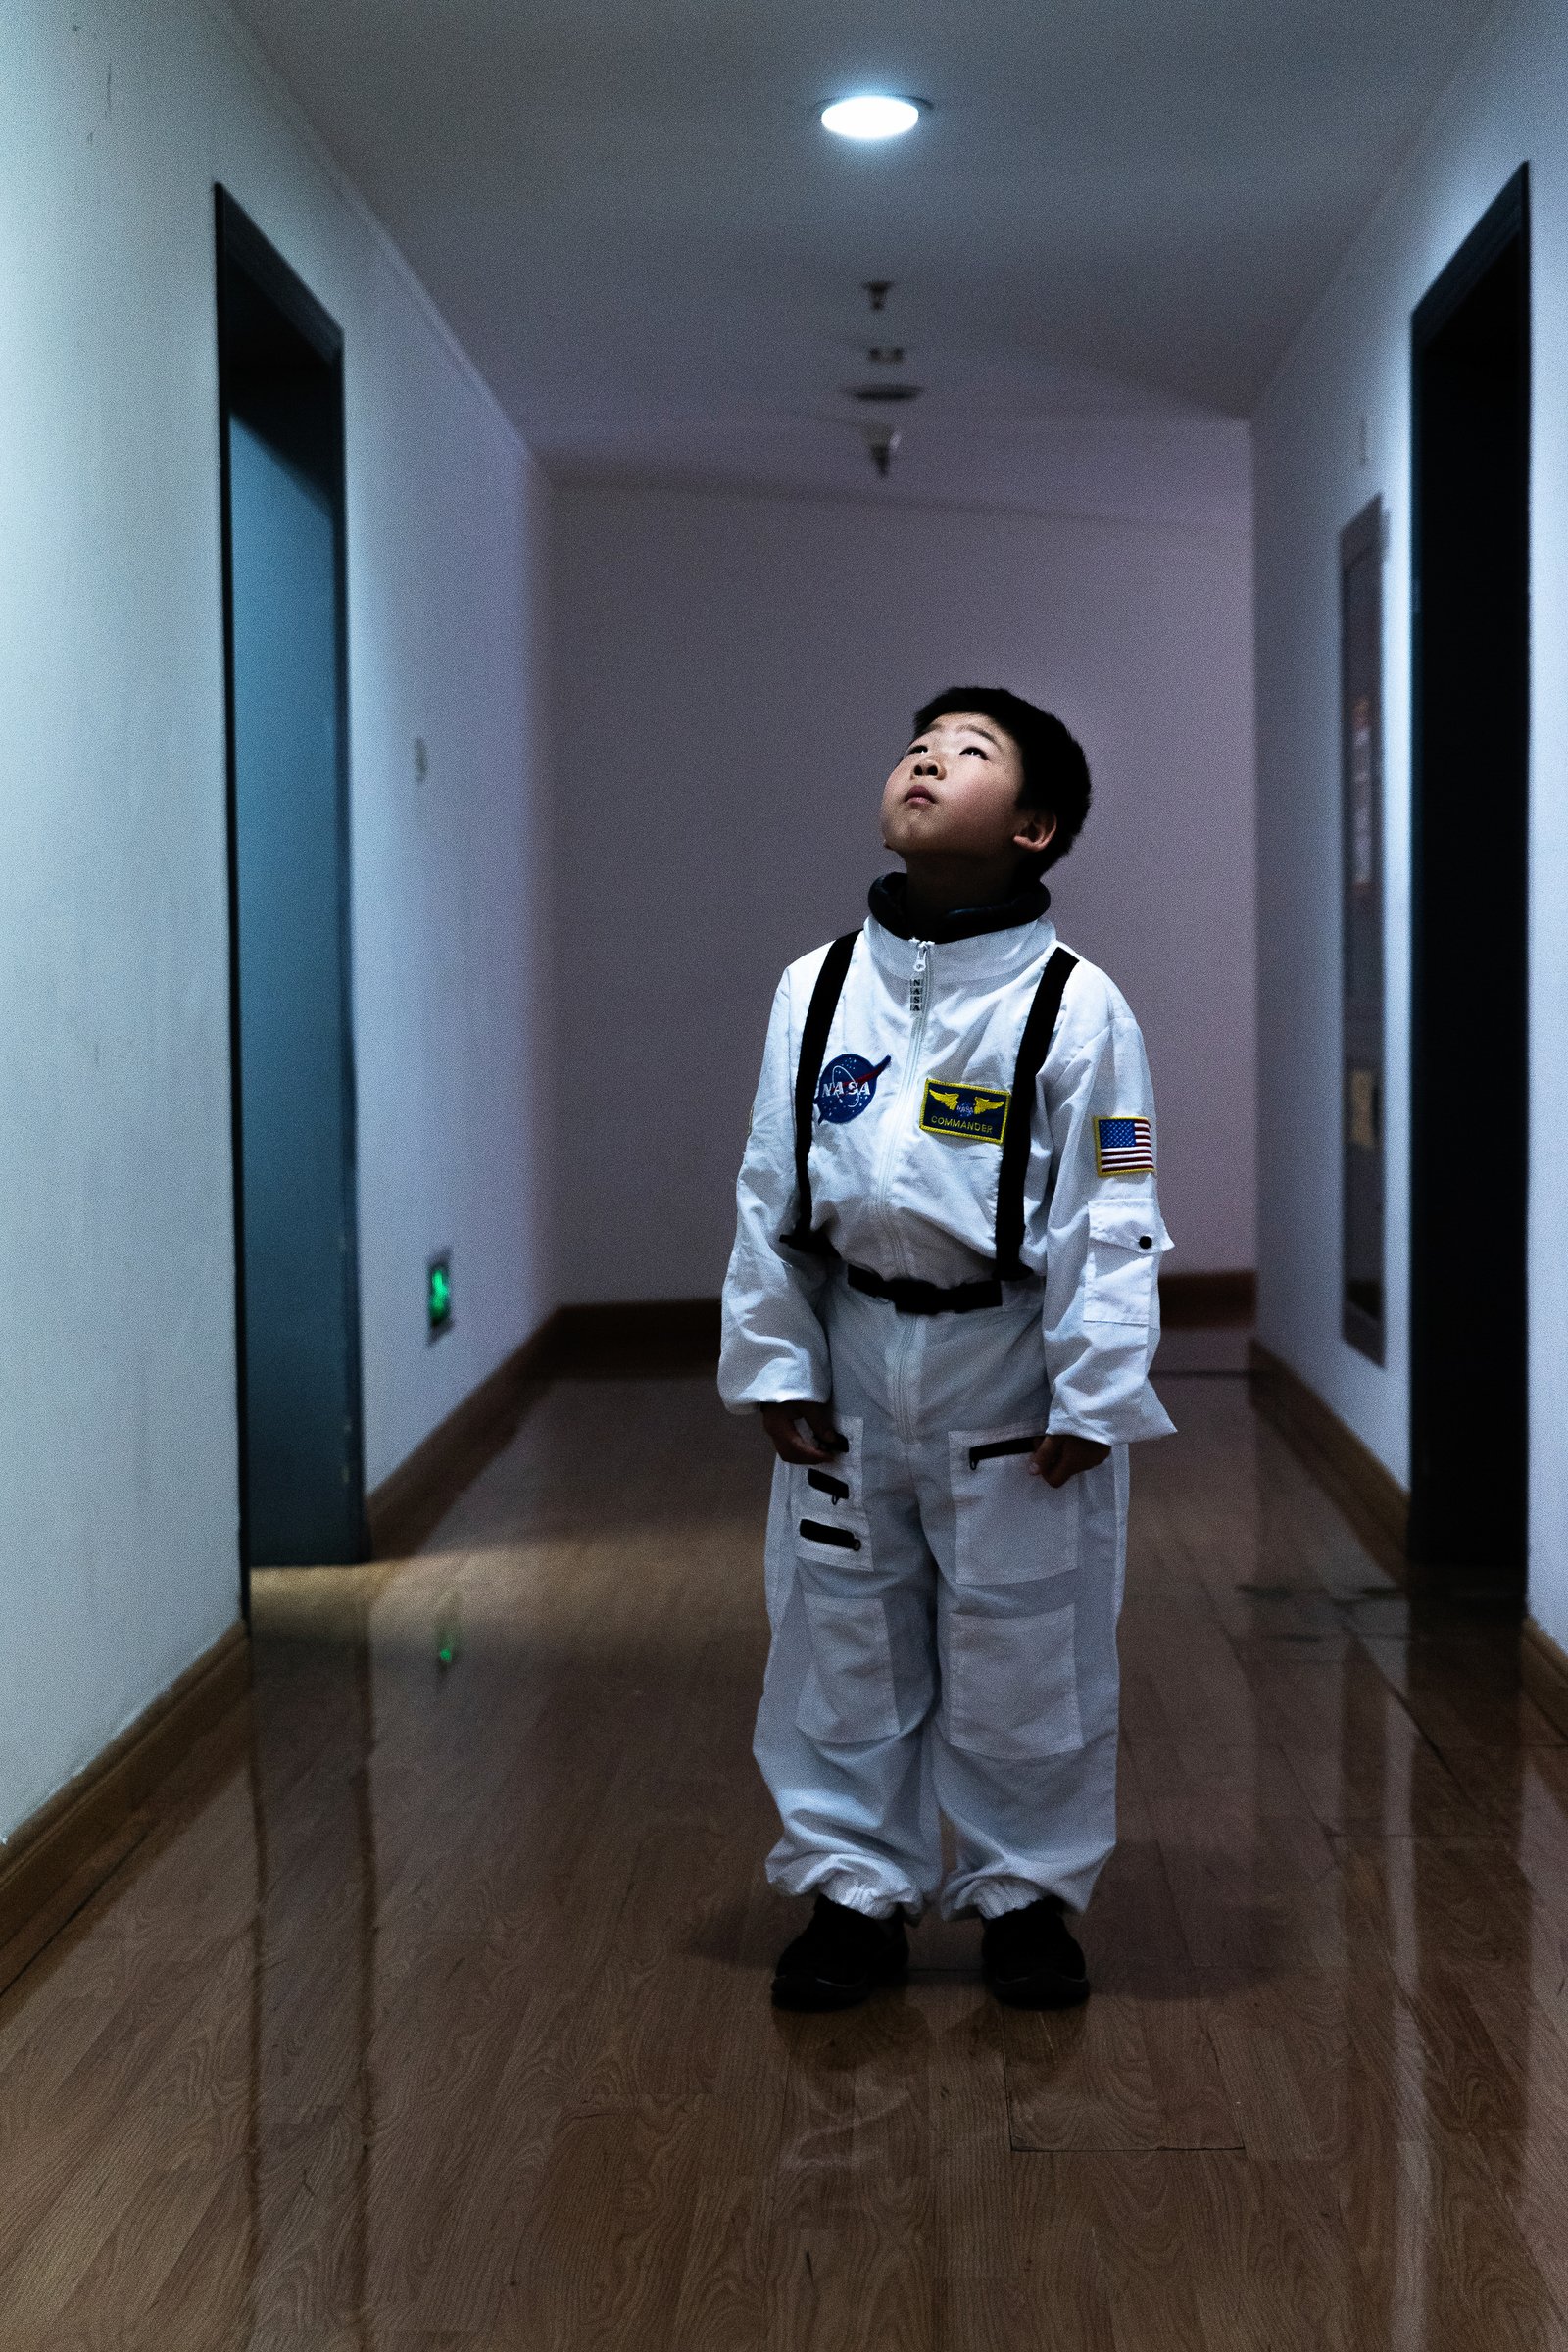  A photo of a buy visiting a Mars Society day in the old observatory in Beijing. 